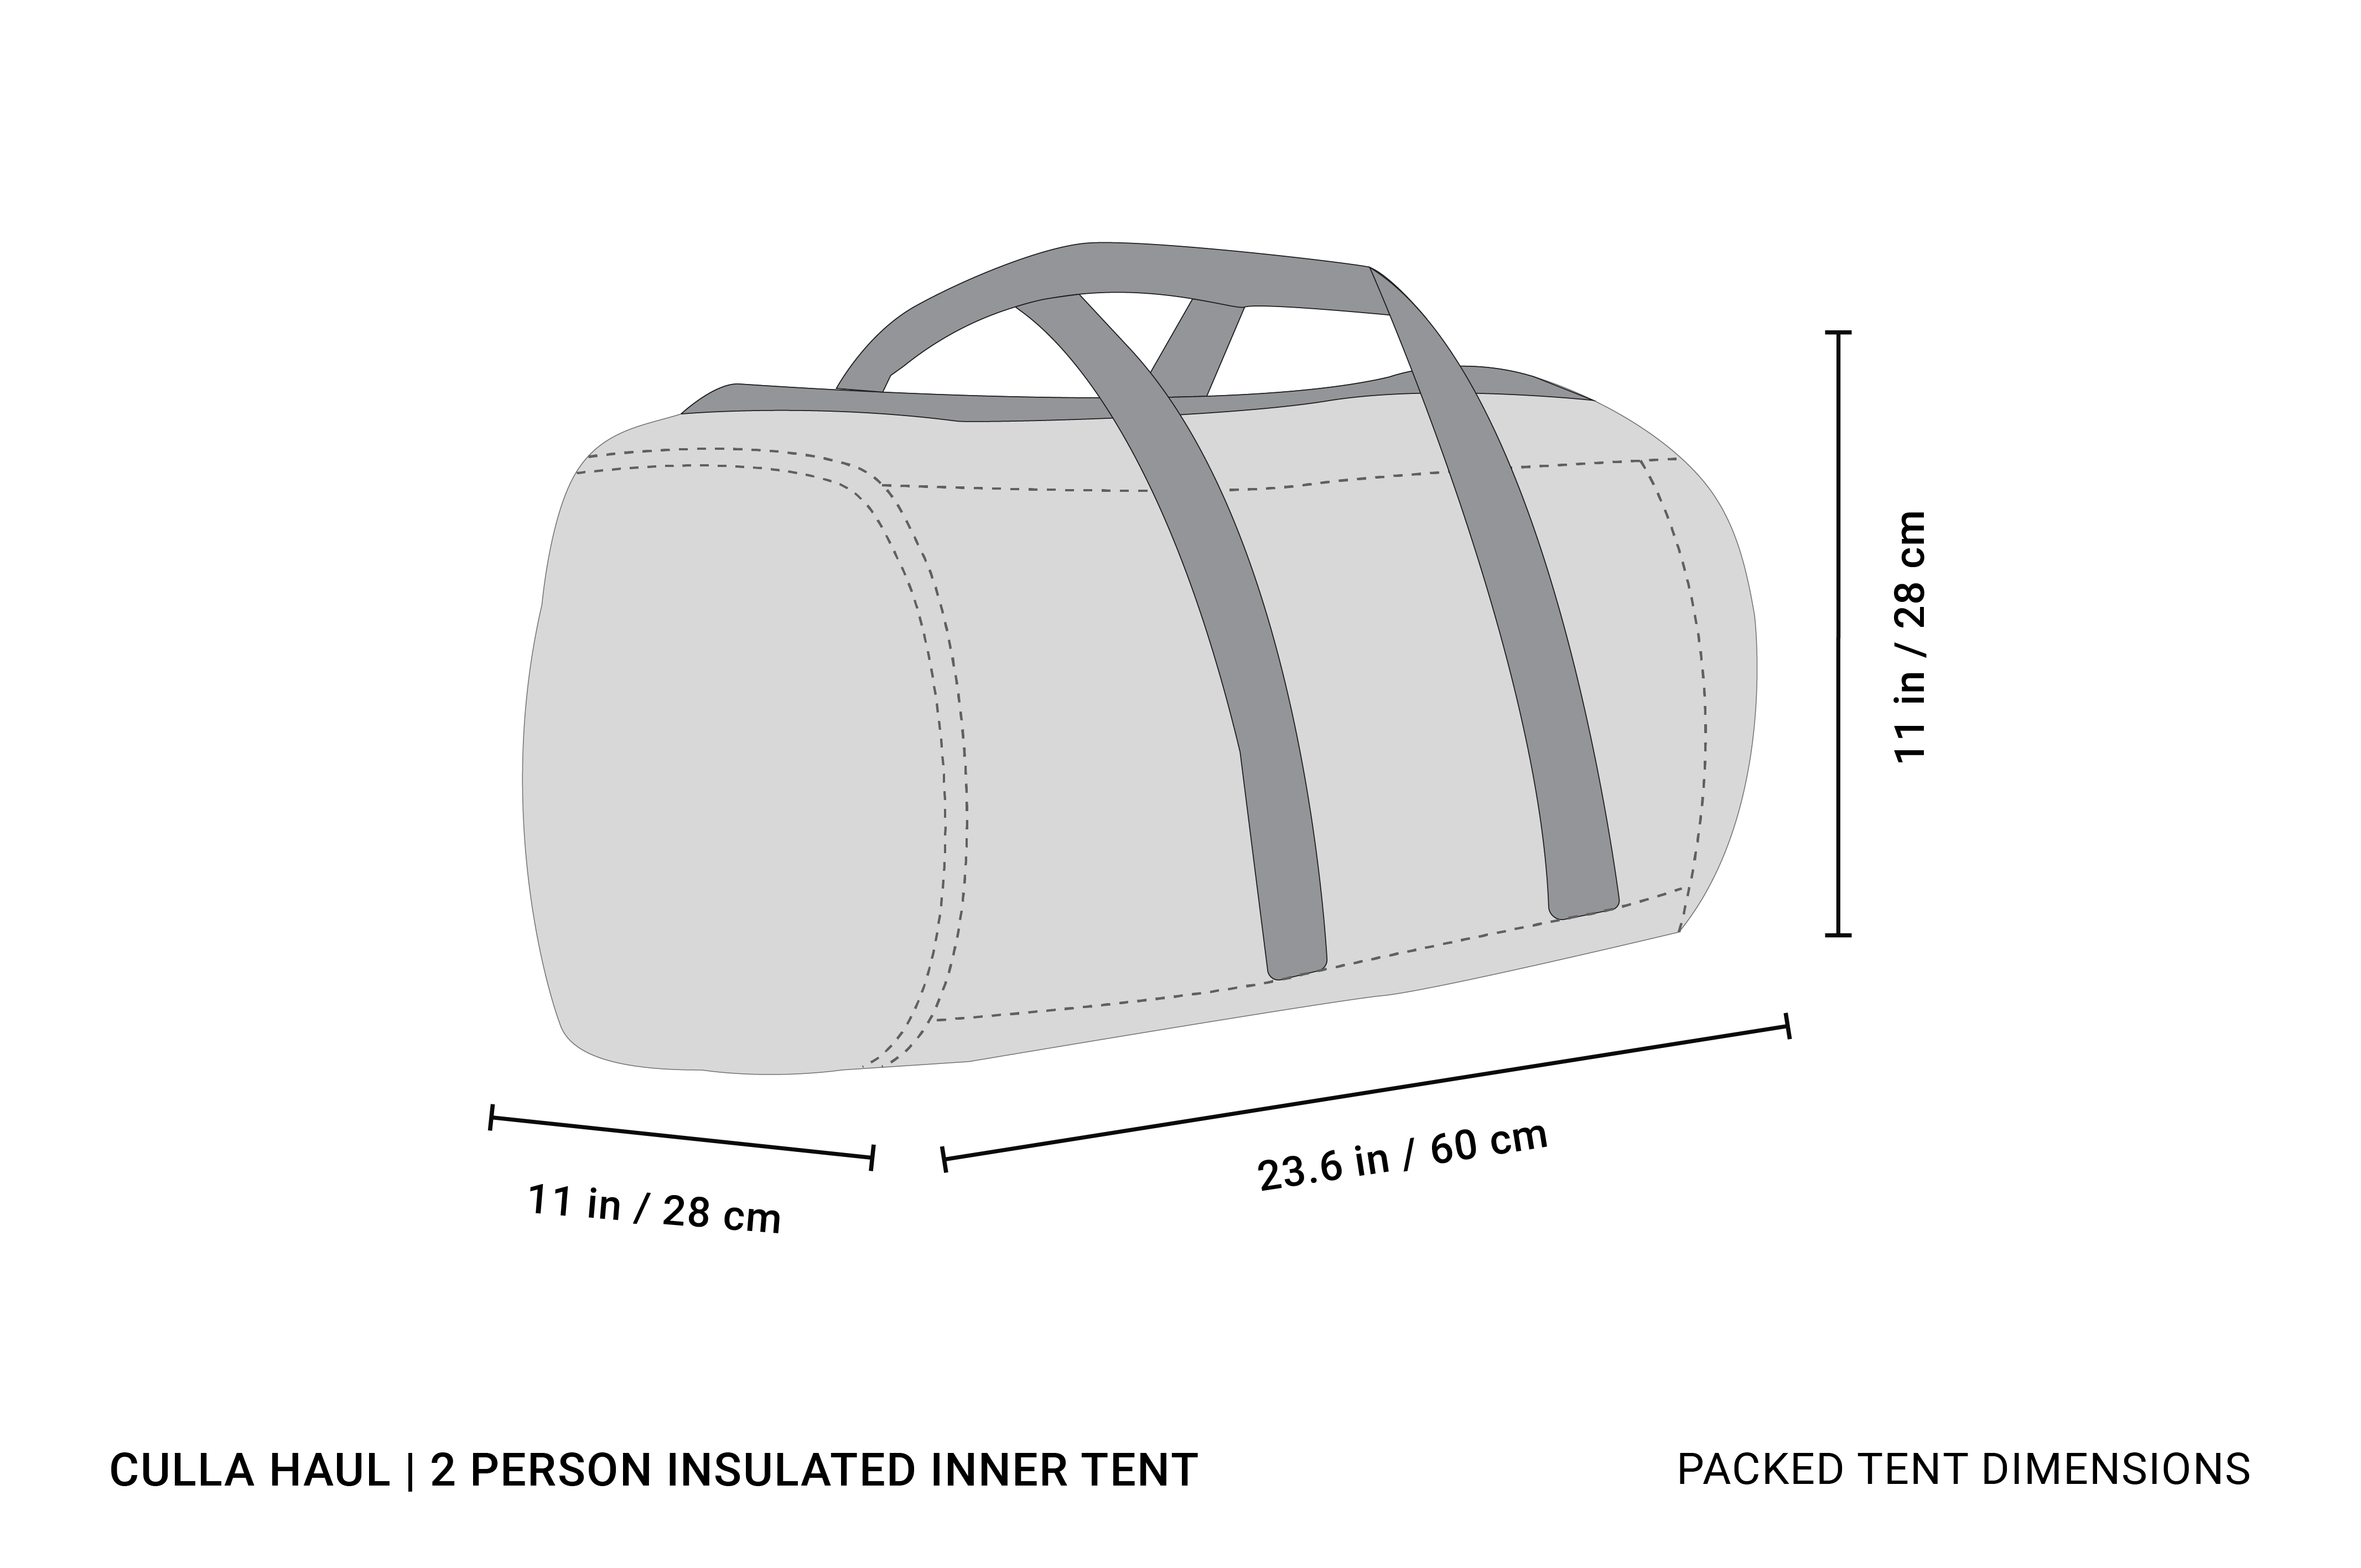 CULLA HAUL | 2 PERSON INSULATED INNER TENT